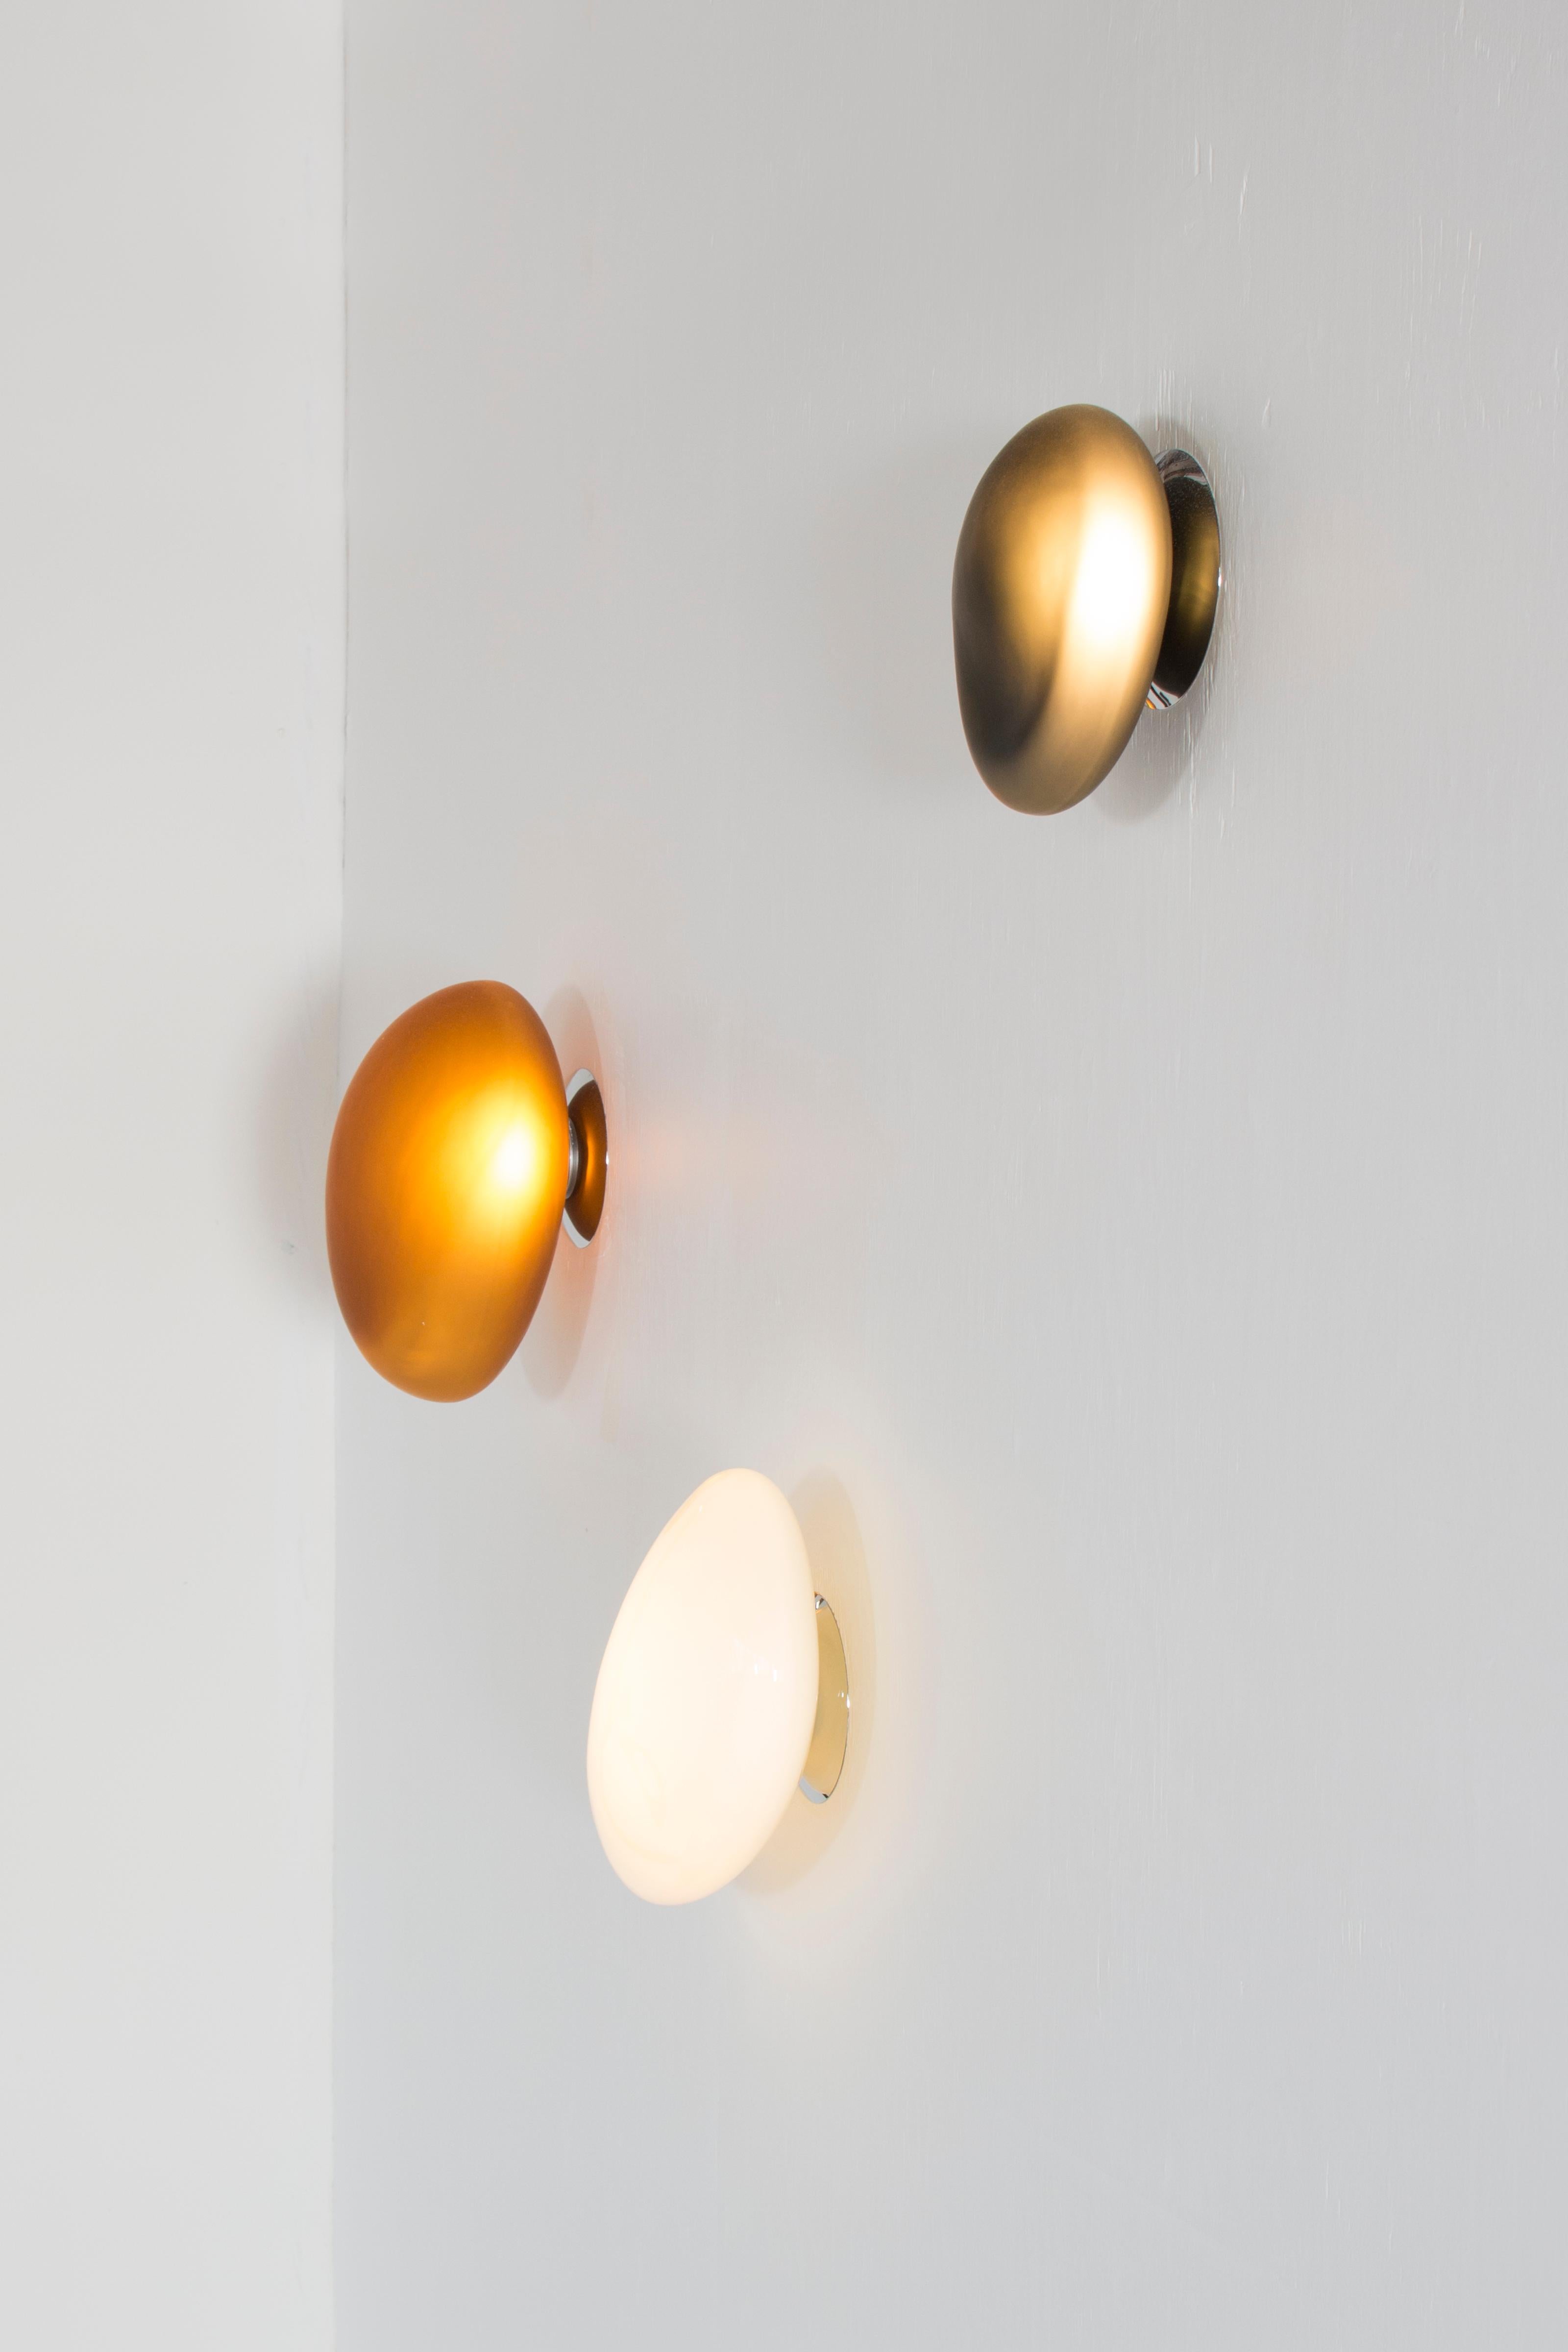 Glass Contemporary Wall Lamp 'Pebble' by Andlight, Shape A, White For Sale